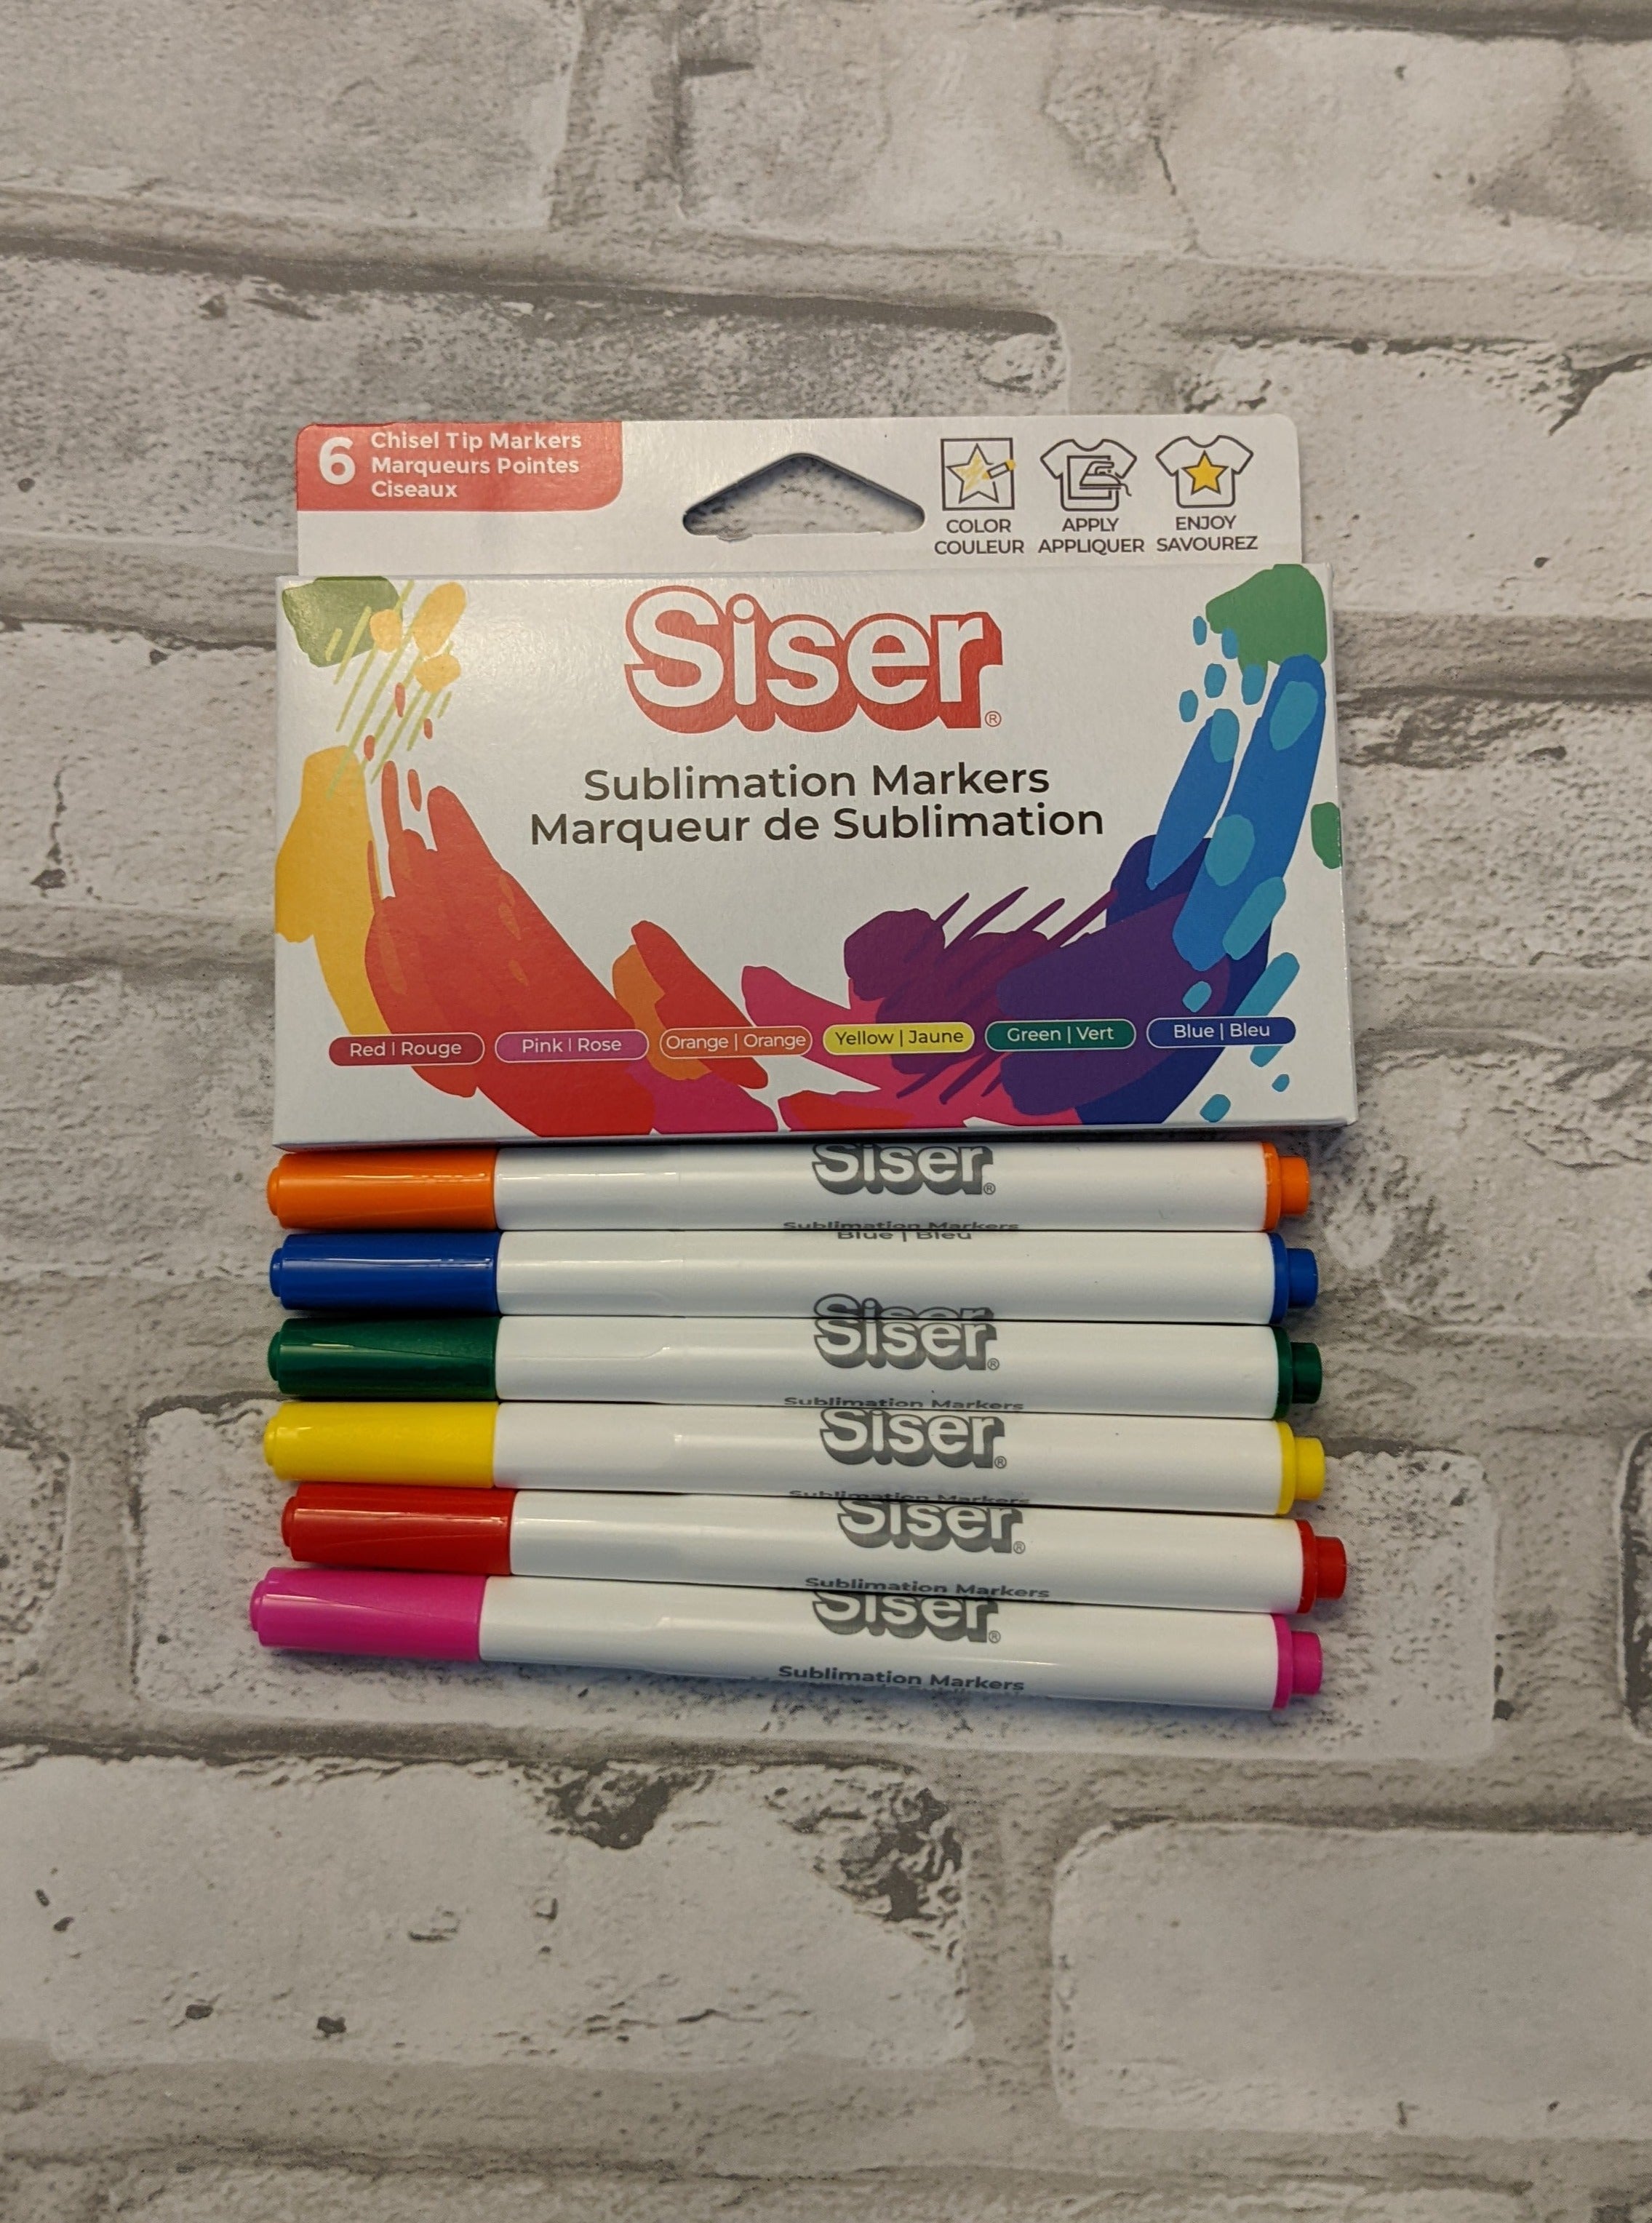 How To Use Siser Sublimation Markers